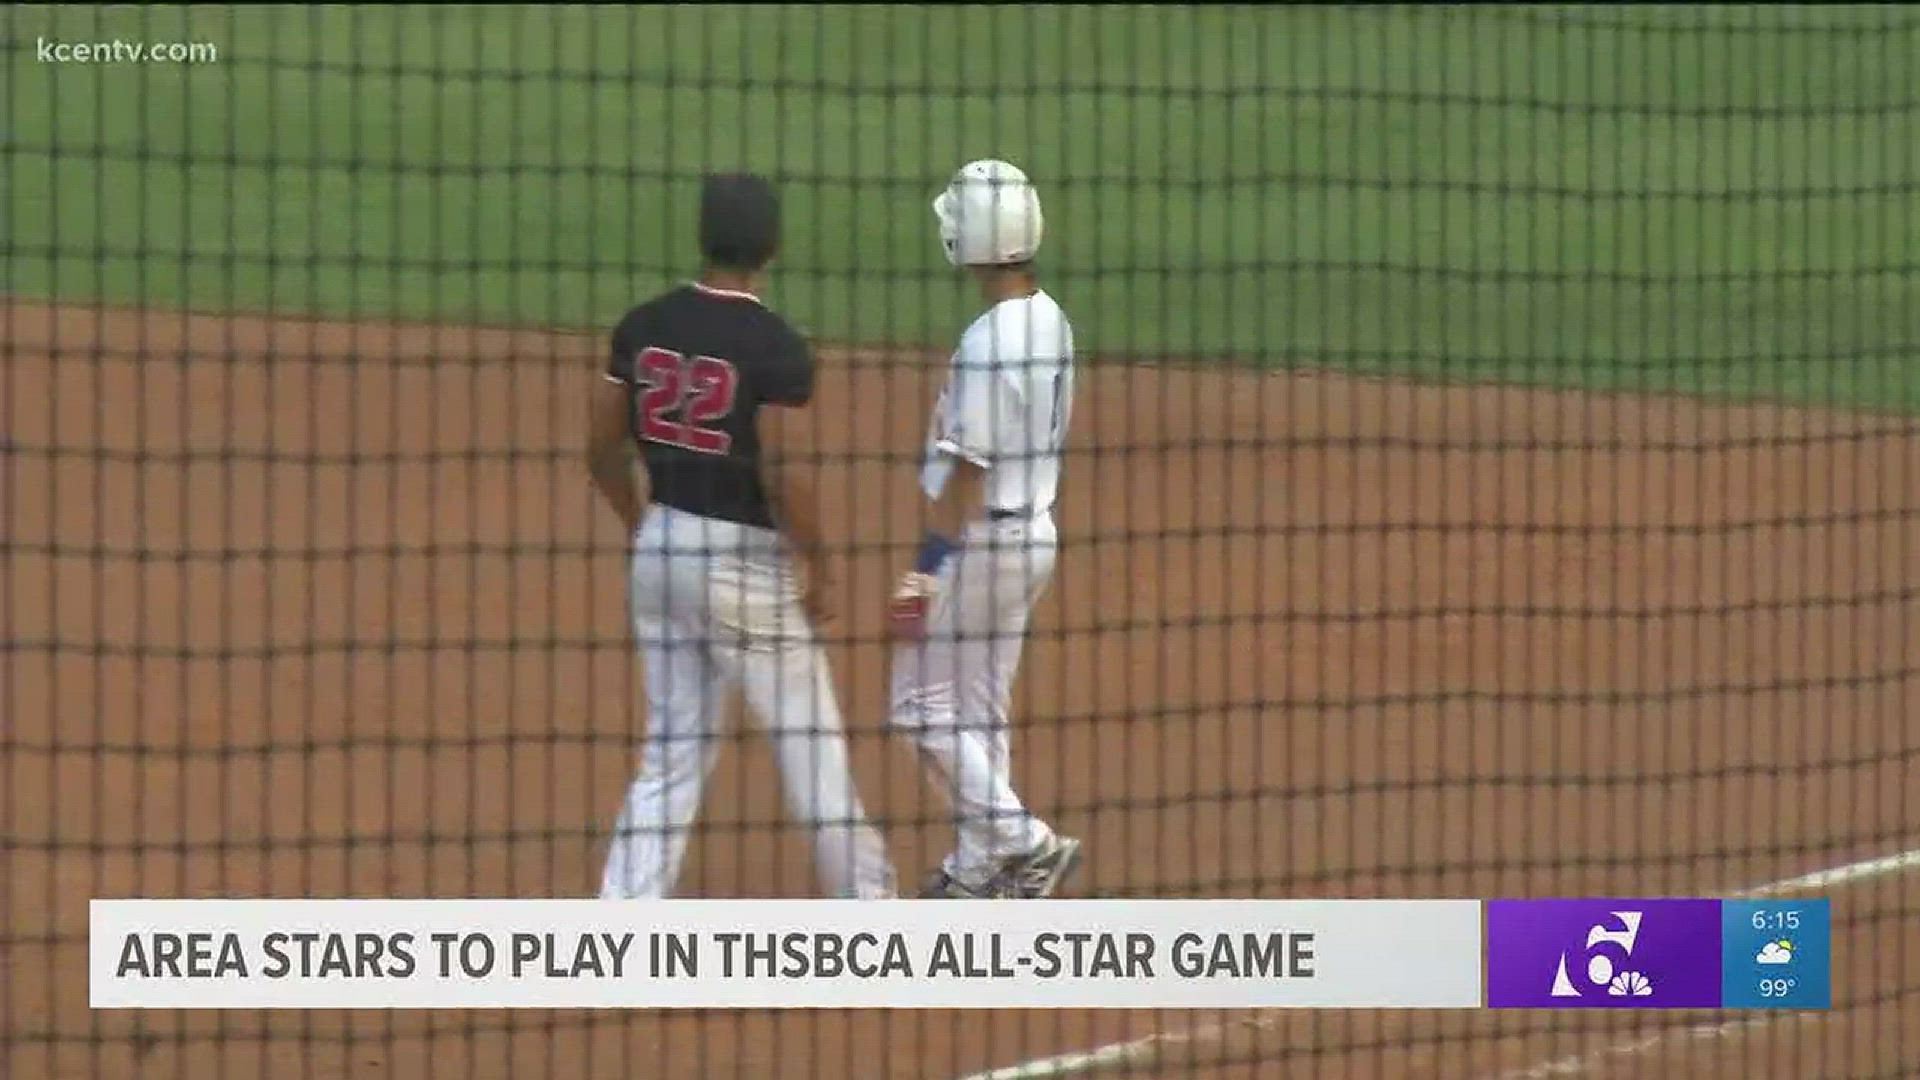 The 45th Annual Texas High School baseball coaches association all-star game will be played tomorrow afternoon at Dell Diamond in Round Rock.